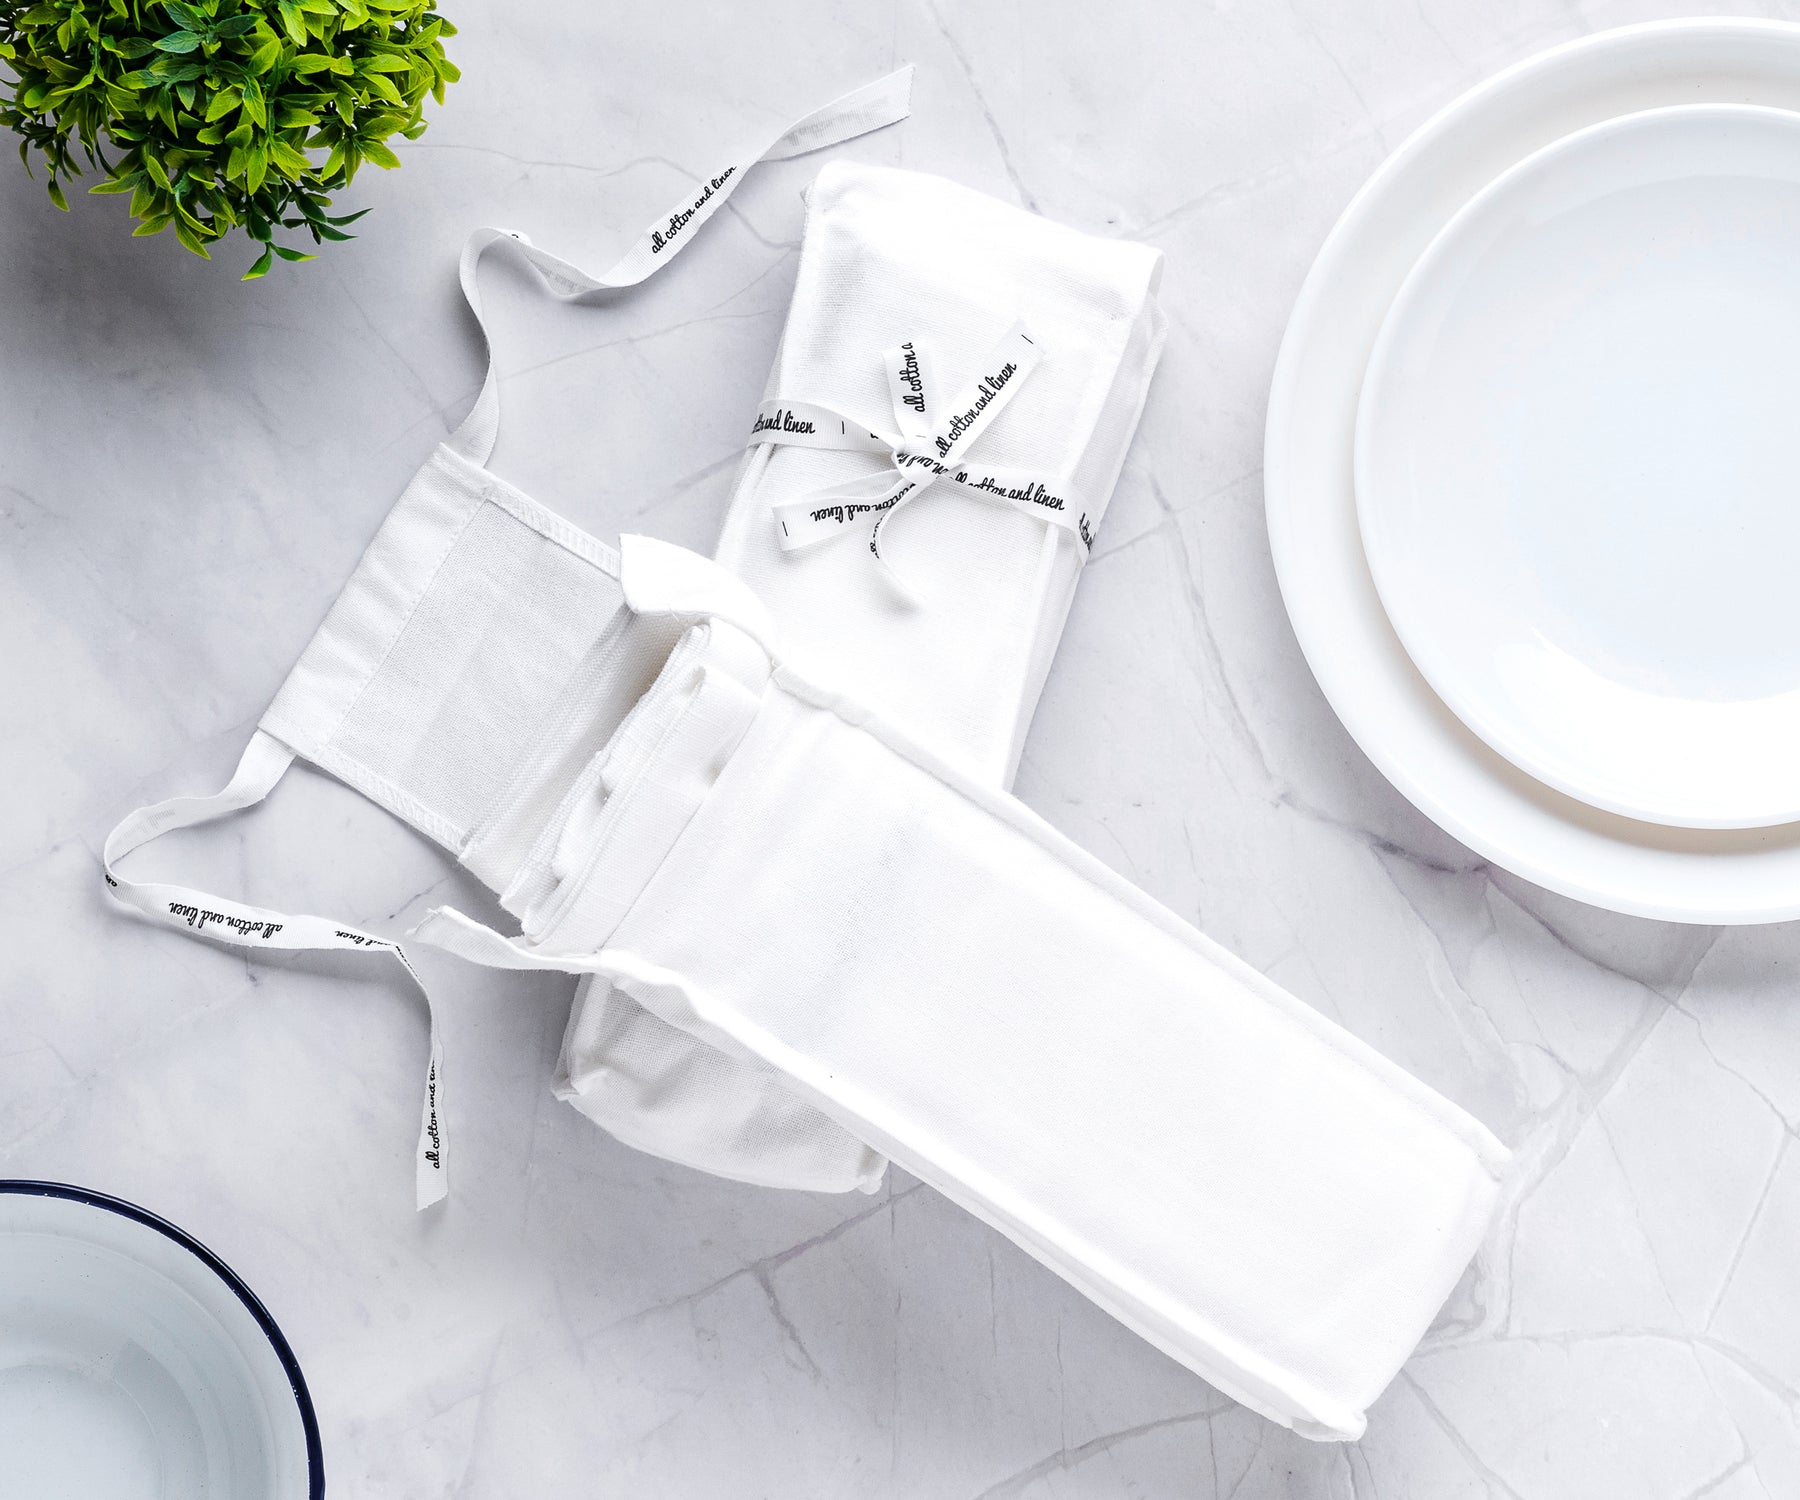 cloth napkins bulk make them a luxurious and practical choice for any table setting.